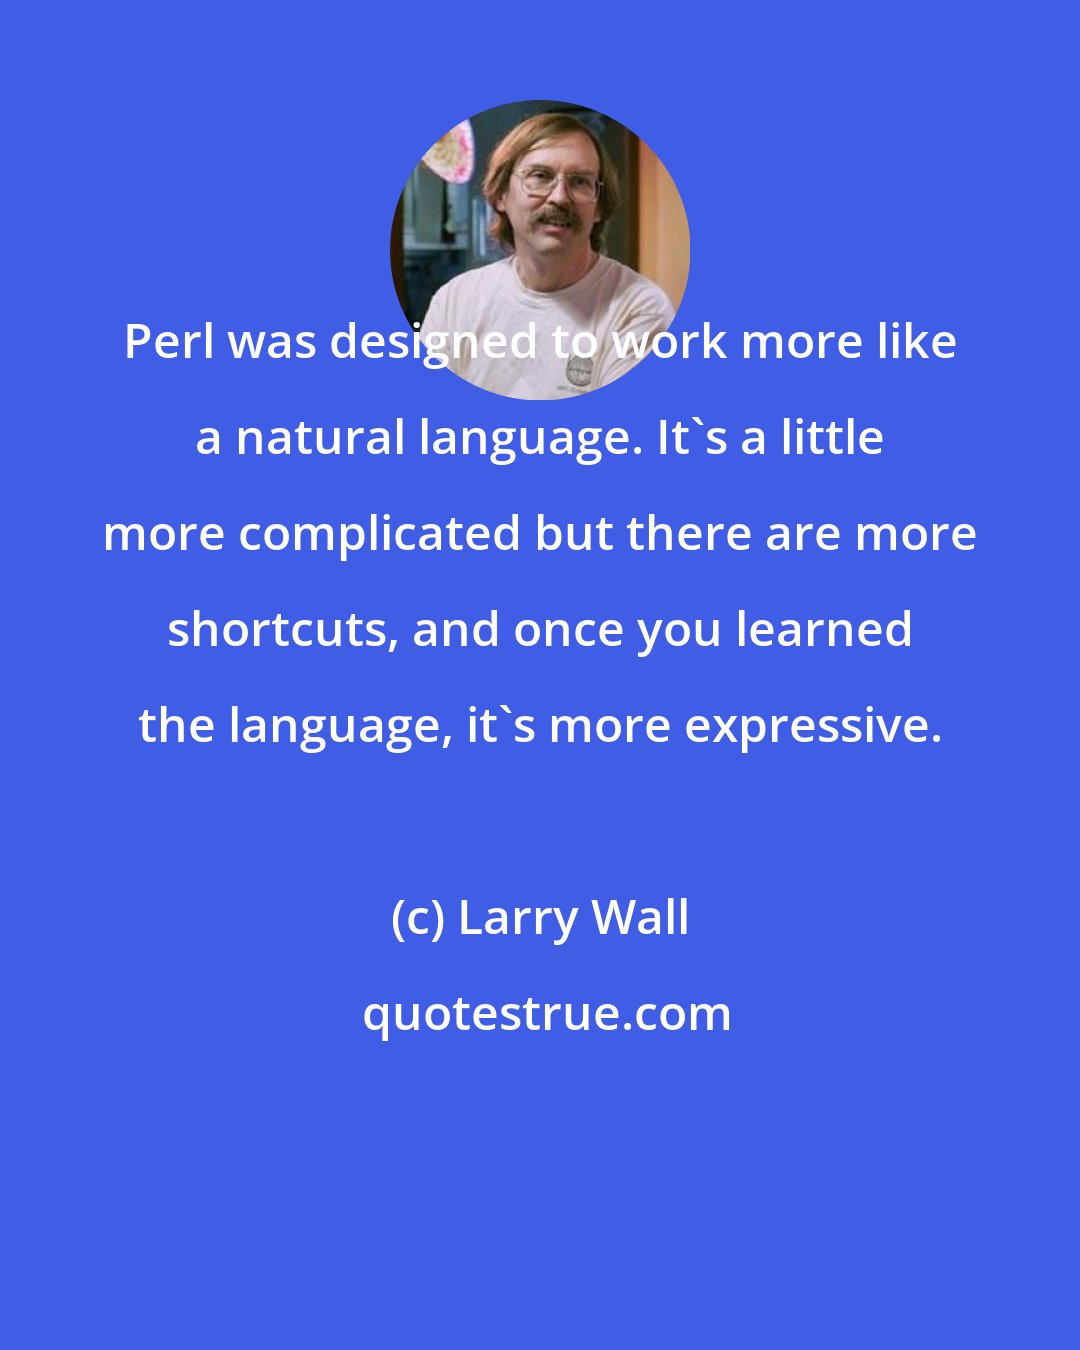 Larry Wall: Perl was designed to work more like a natural language. It's a little more complicated but there are more shortcuts, and once you learned the language, it's more expressive.